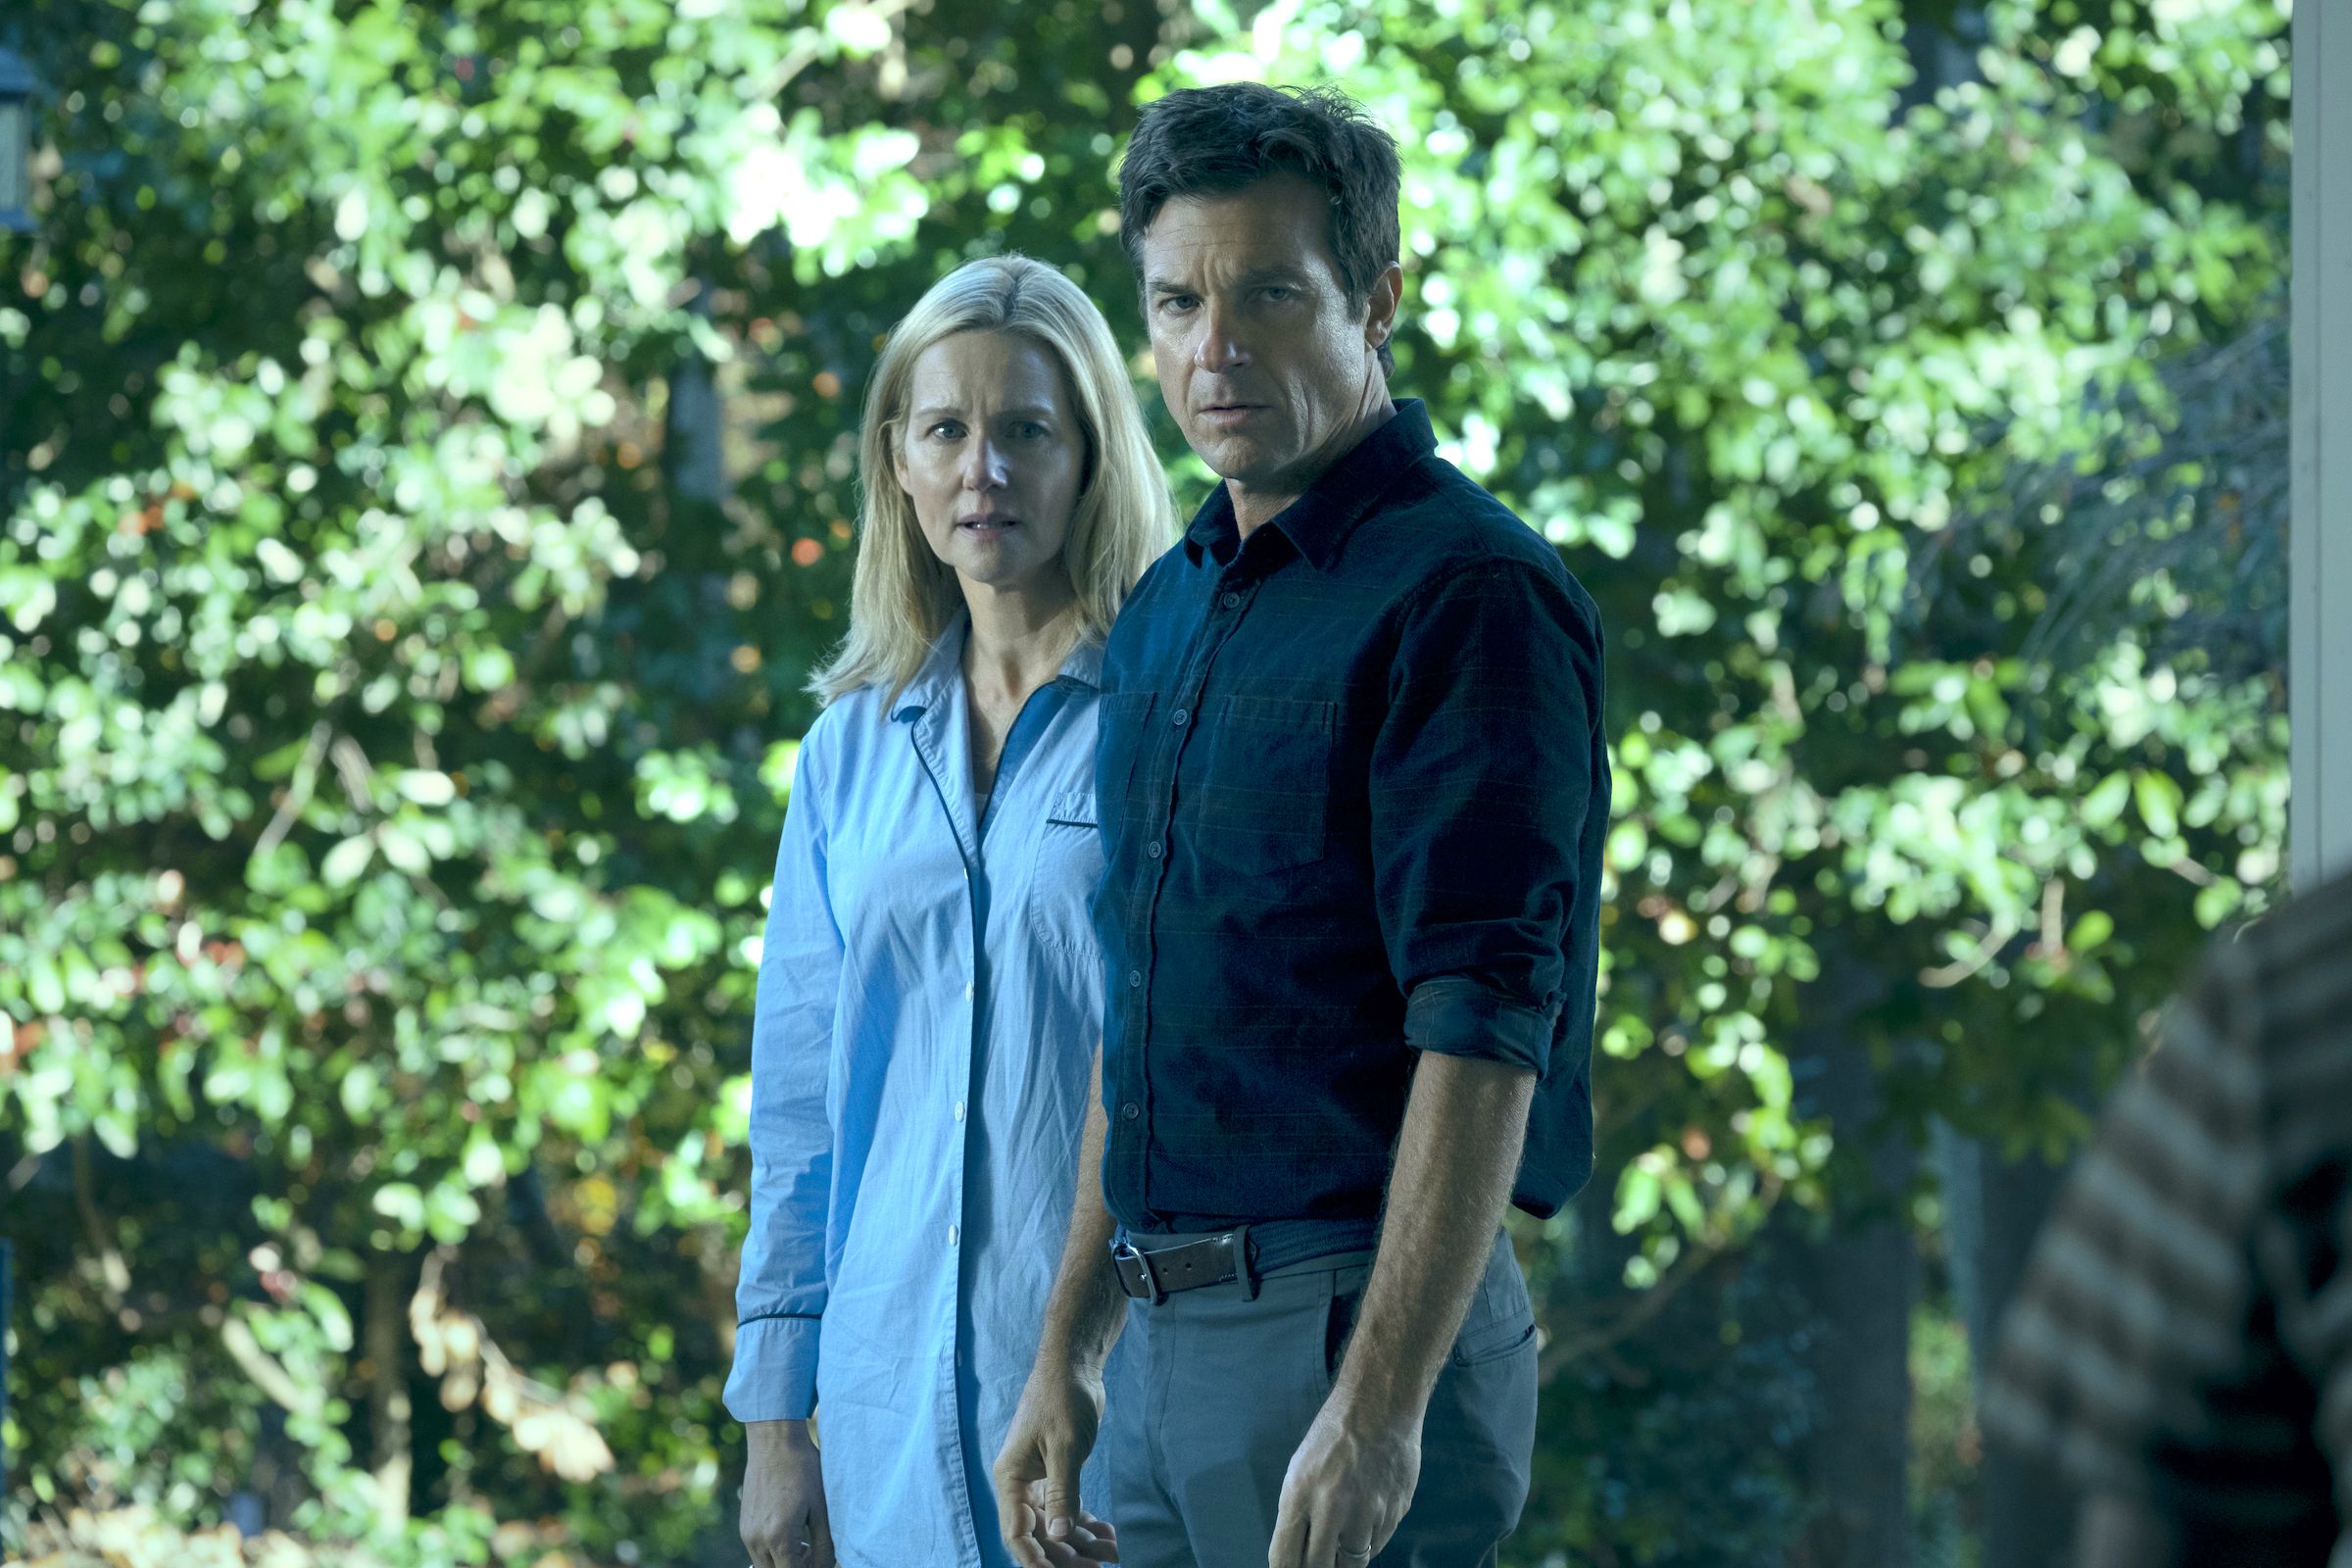 Ozark' Season 4: Everything We Know About the Final Episodes